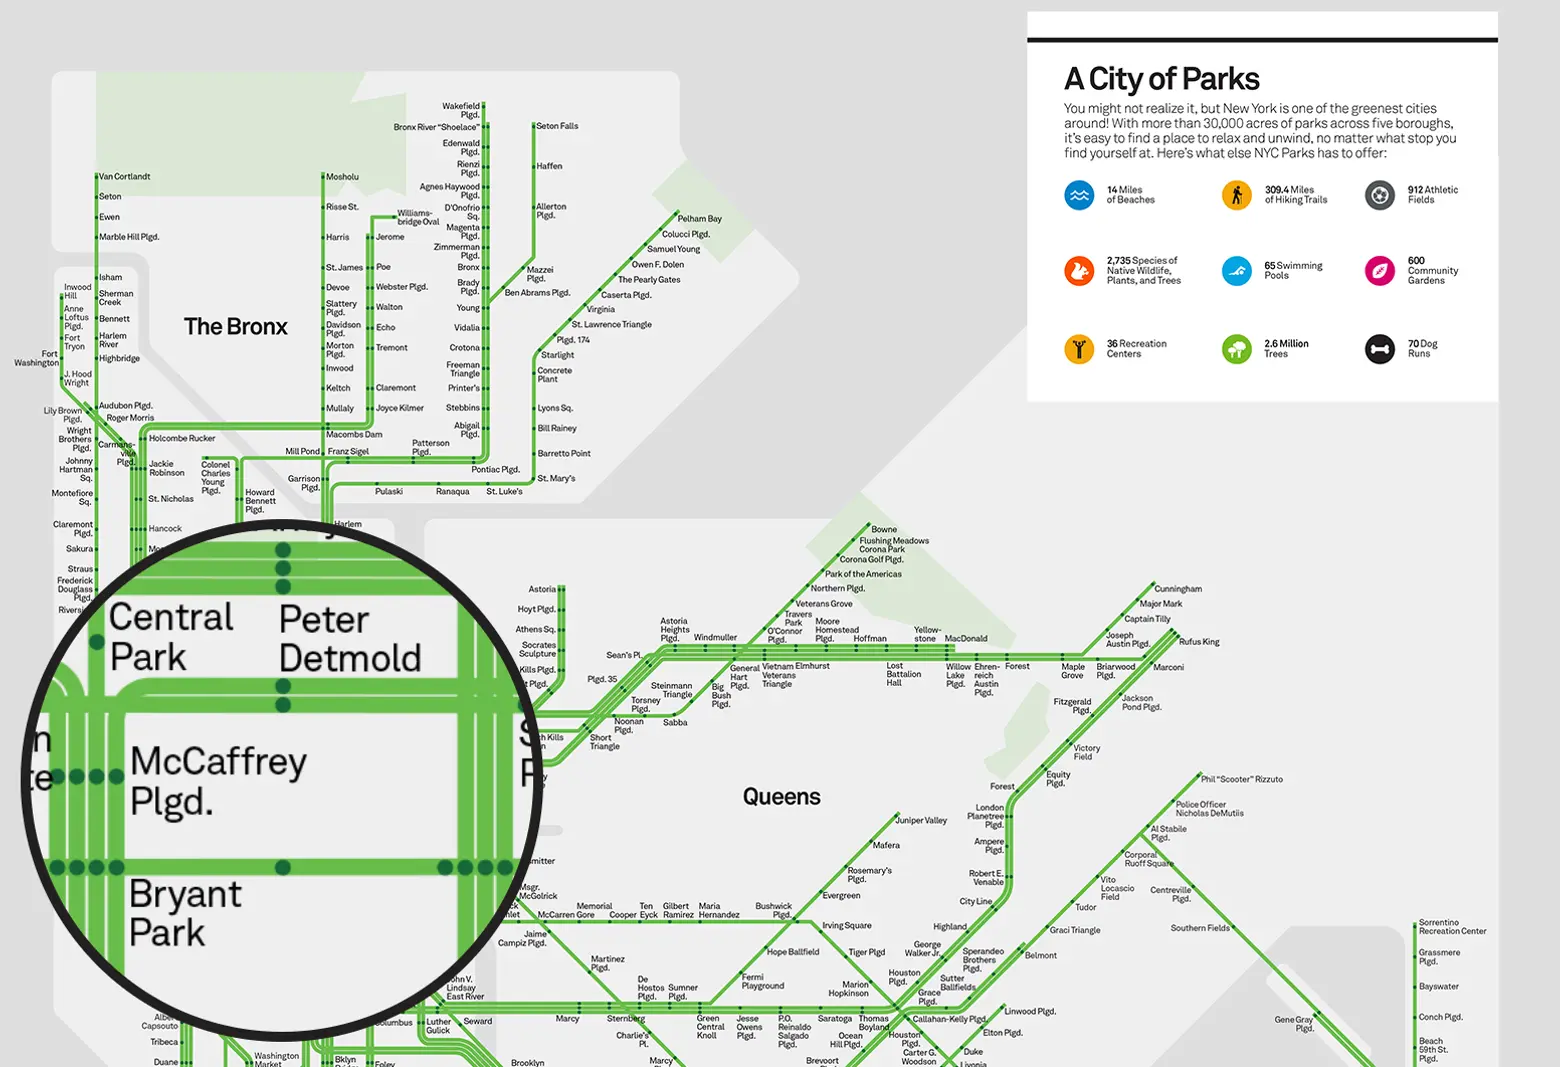 This subway-style map plots NYC parks